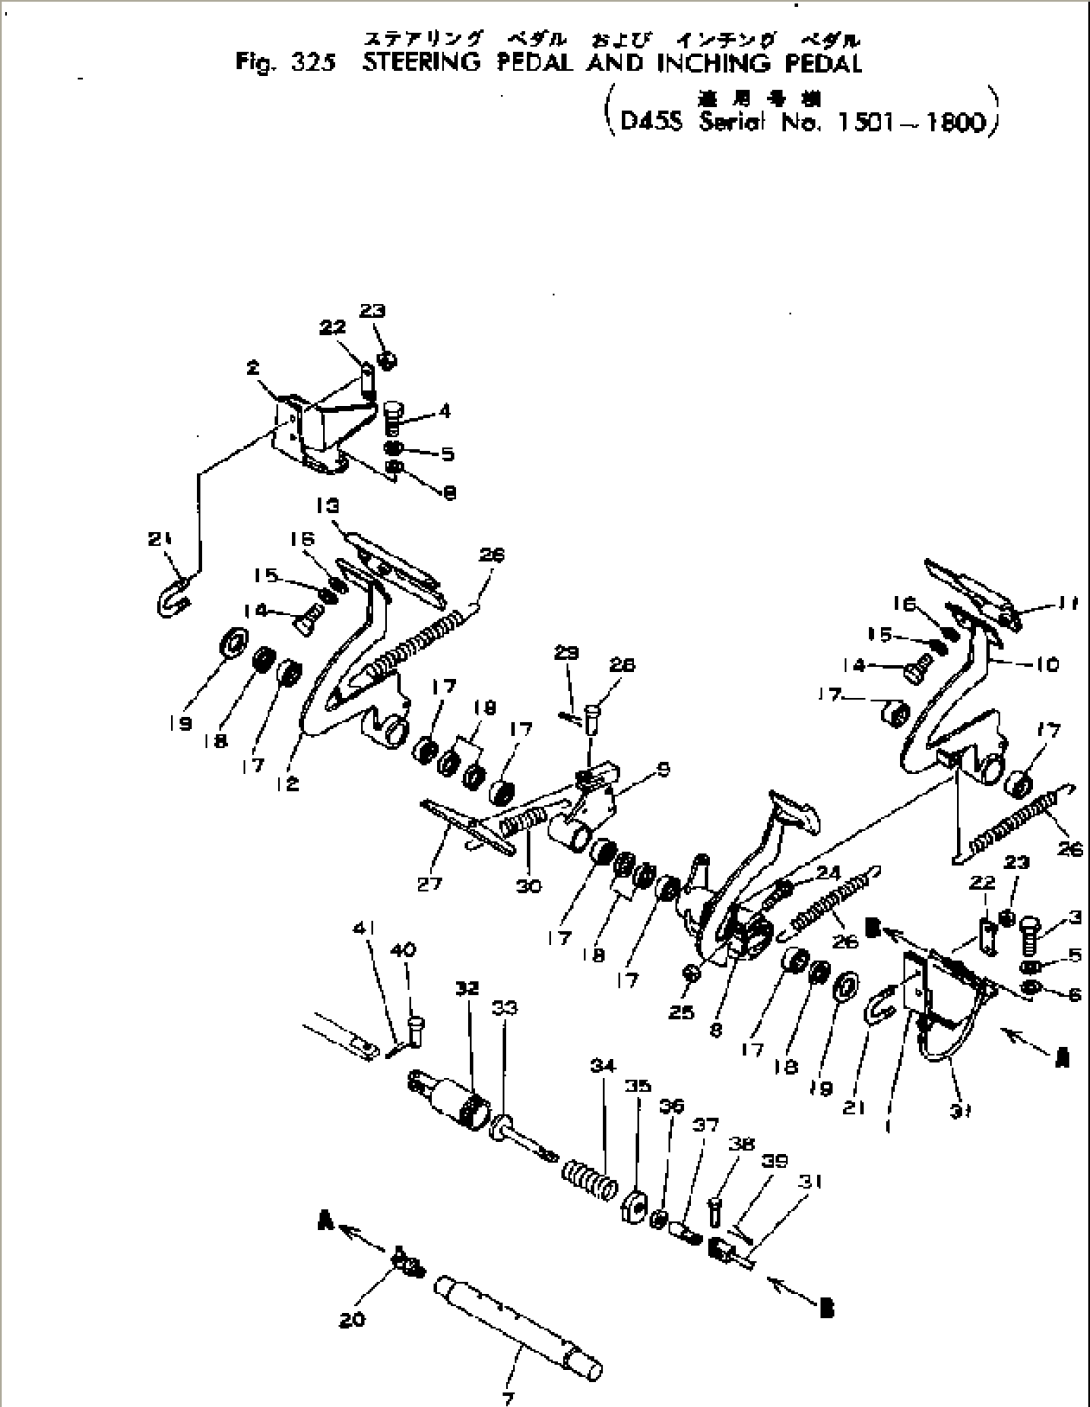 STEERING PEDAL AND INCHING(#1501-1800)